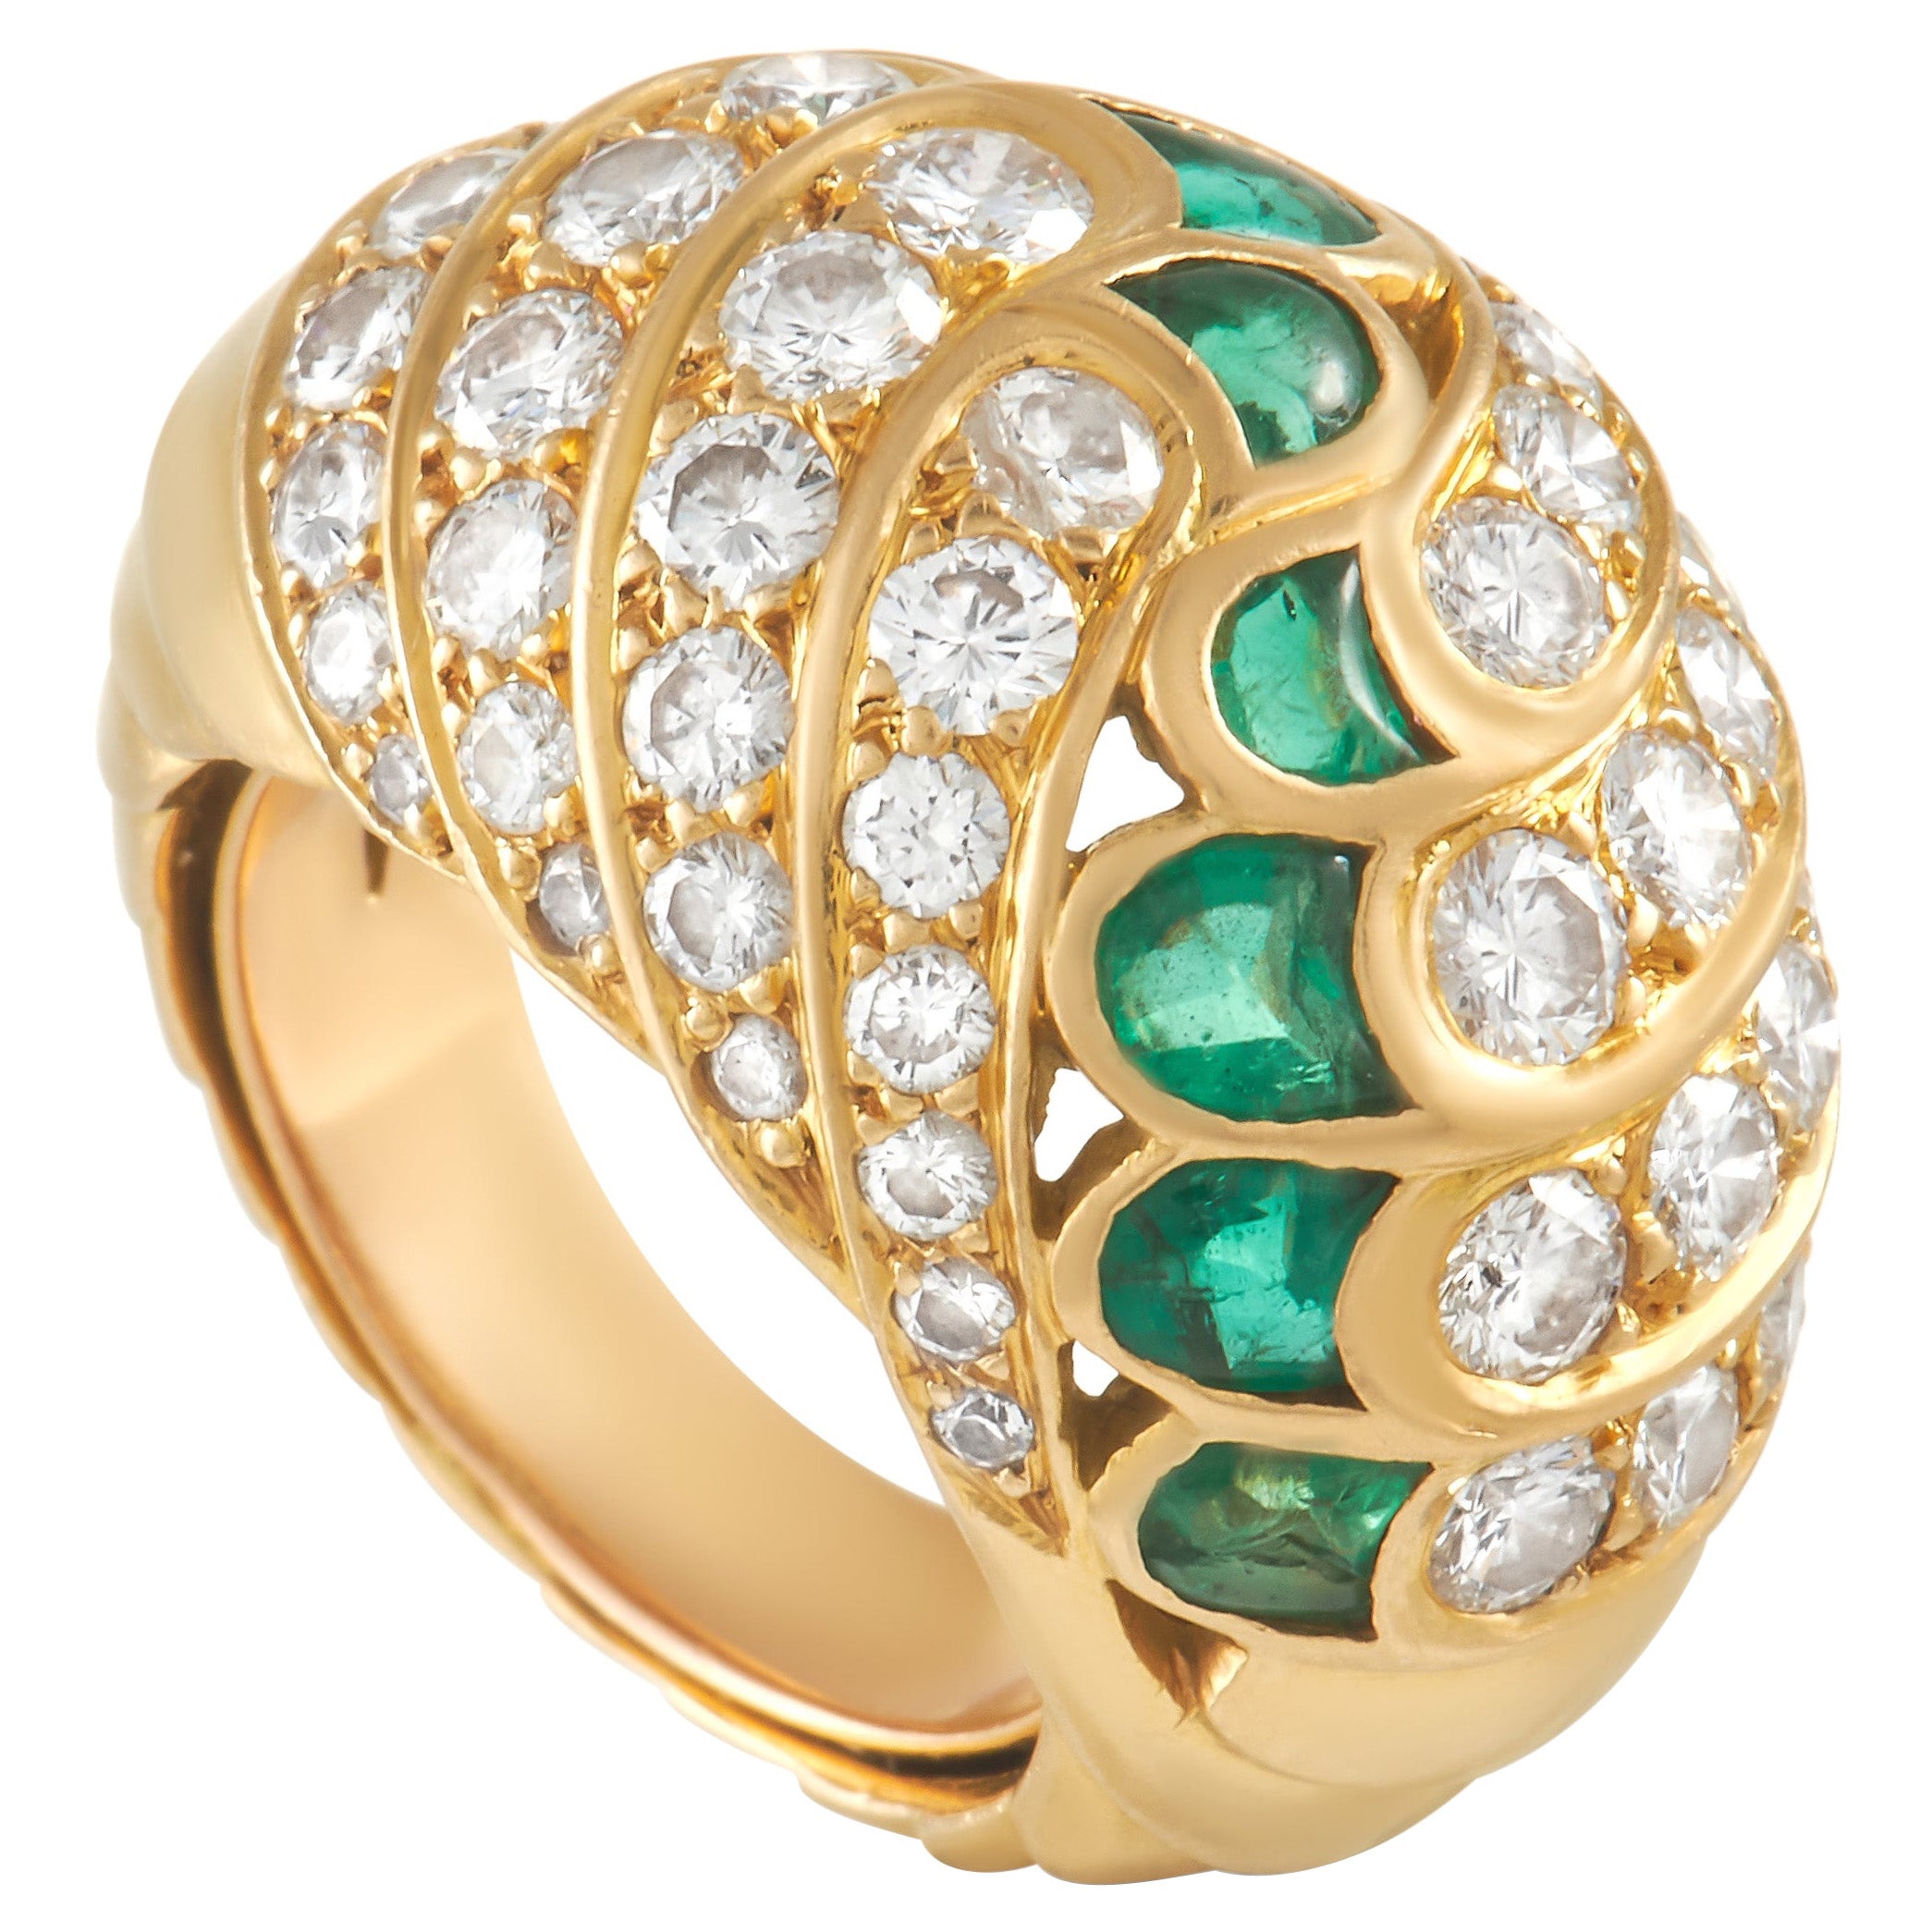 Piaget 18K Yellow Gold 2.25 Ct Diamond and Emerald Ring For Sale